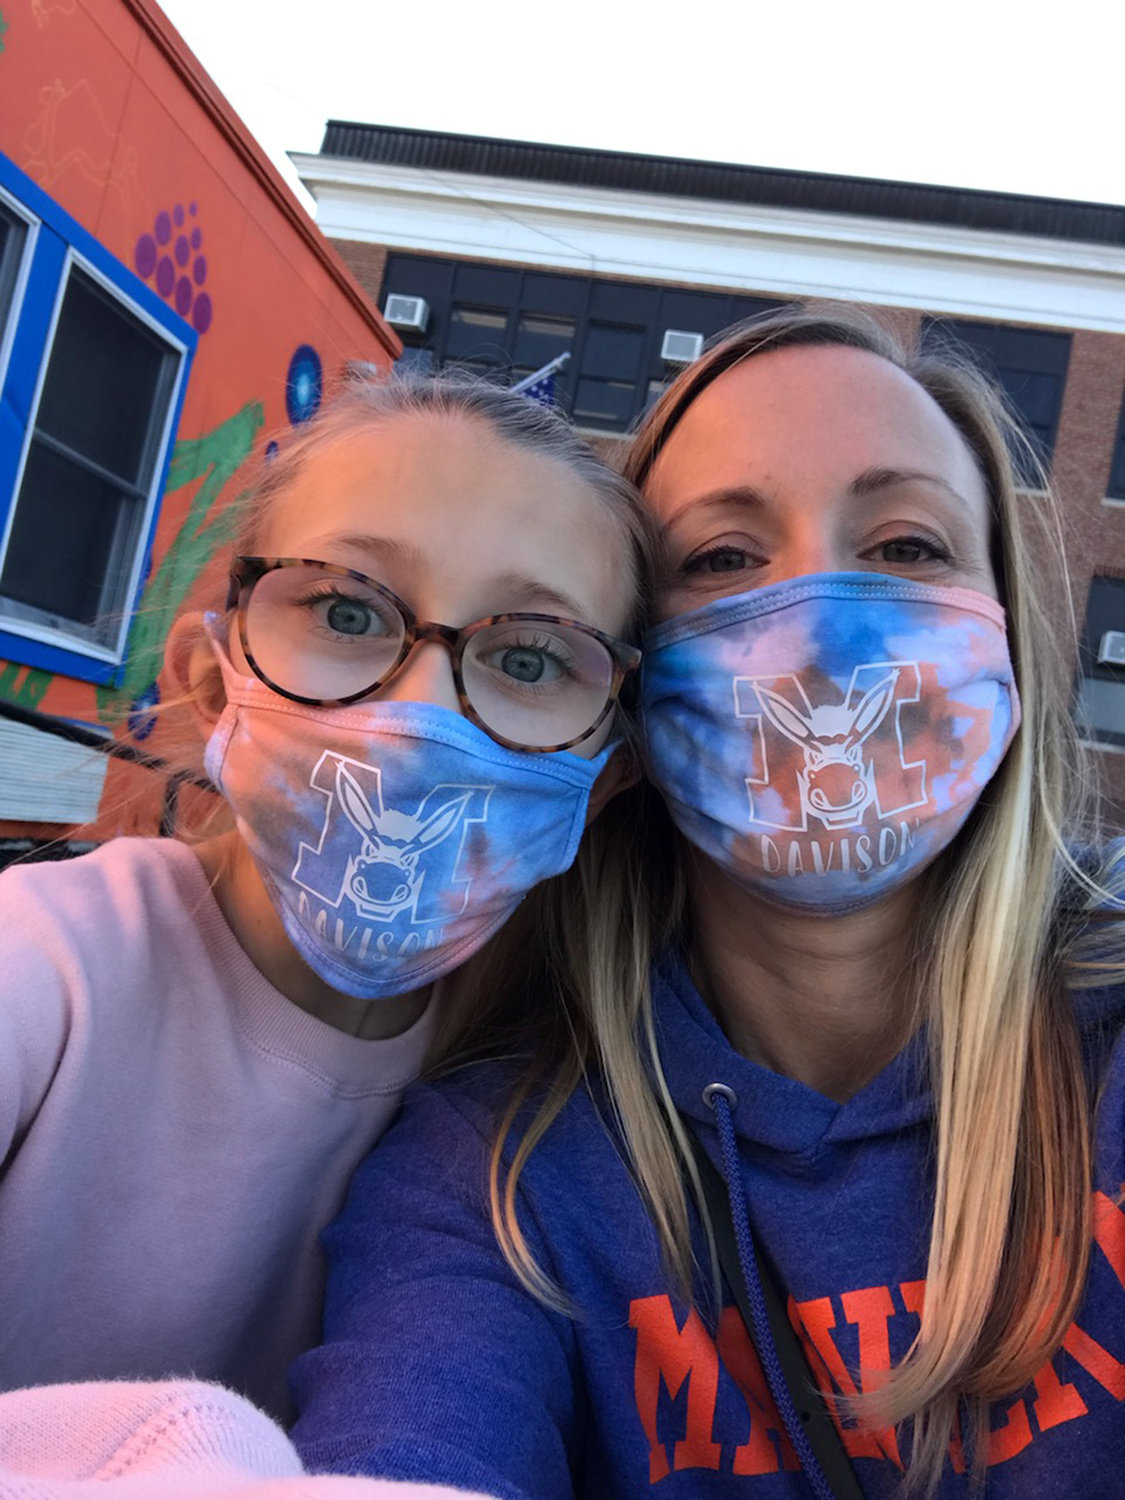 Davison Avenue School PTA Co-president Hayley Kelch, and her daughter, Ella, wore custom-made masks to promote the school’s clothing drive.